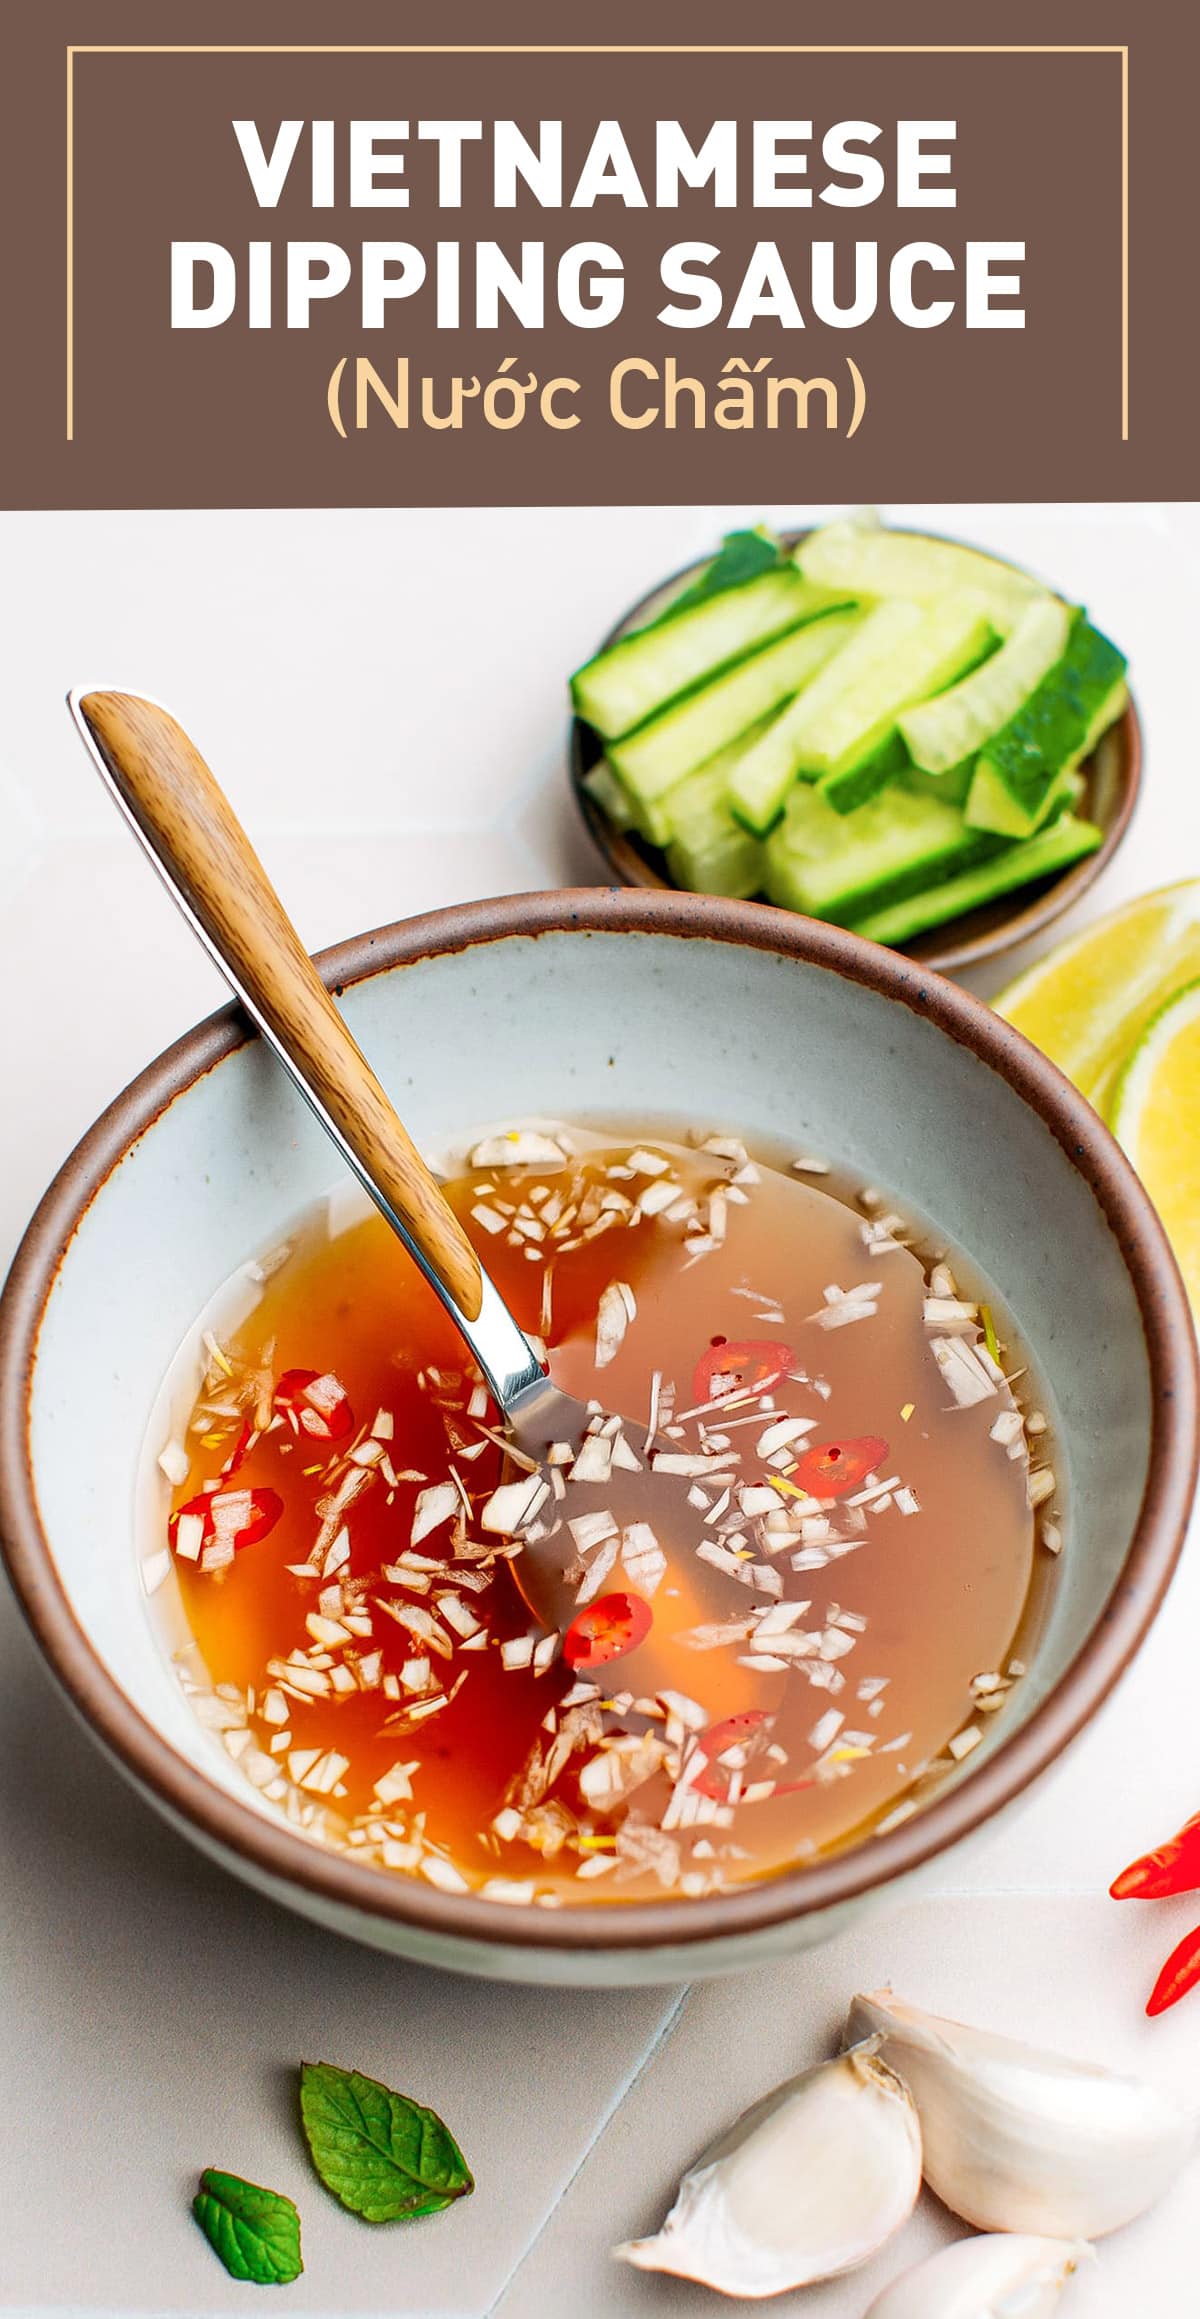 Nước Chấm is a classic Vietnamese dipping sauce that is sweet, salty, tangy, and garlicky! This plant-based version uses vegan fish sauce, lime juice, sugar, garlic, and chili, resulting in a wonderful blend of flavors. It perfectly accompanies fresh spring rolls, bánh xèo, egg rolls, salads, and so much more! #vietnamese #sauce